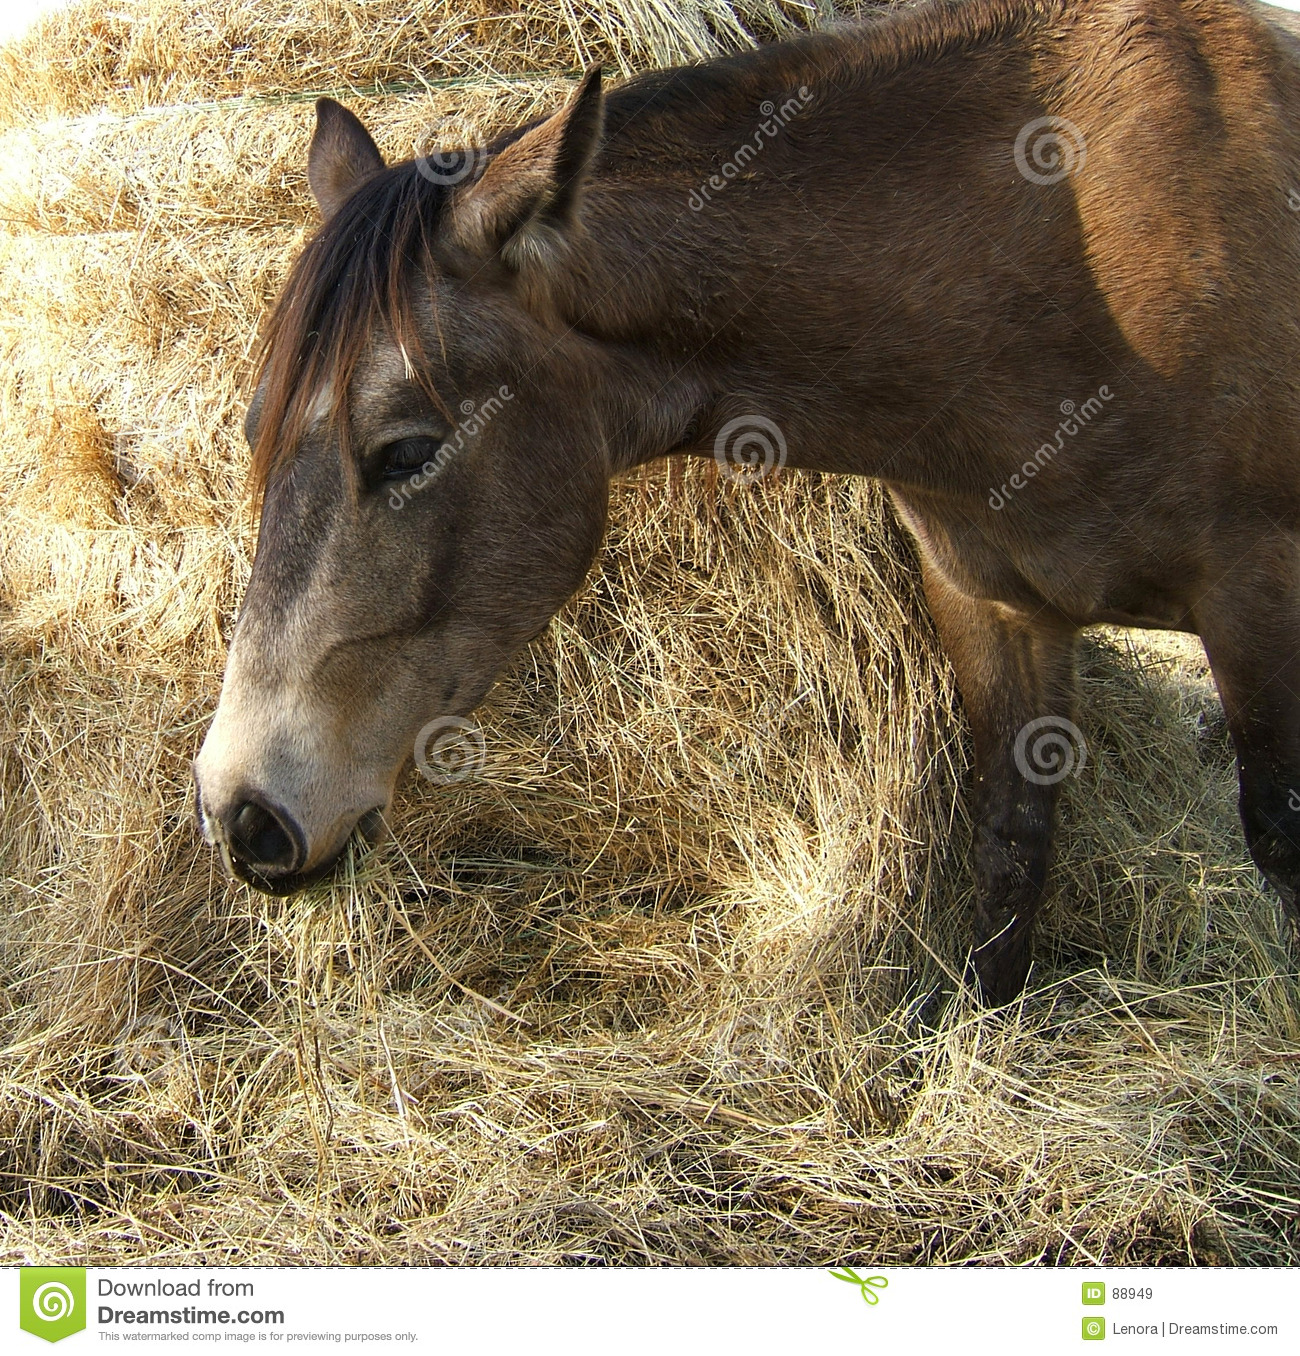 Horse Eating Hay Royalty Free Stock Images   Image  88949